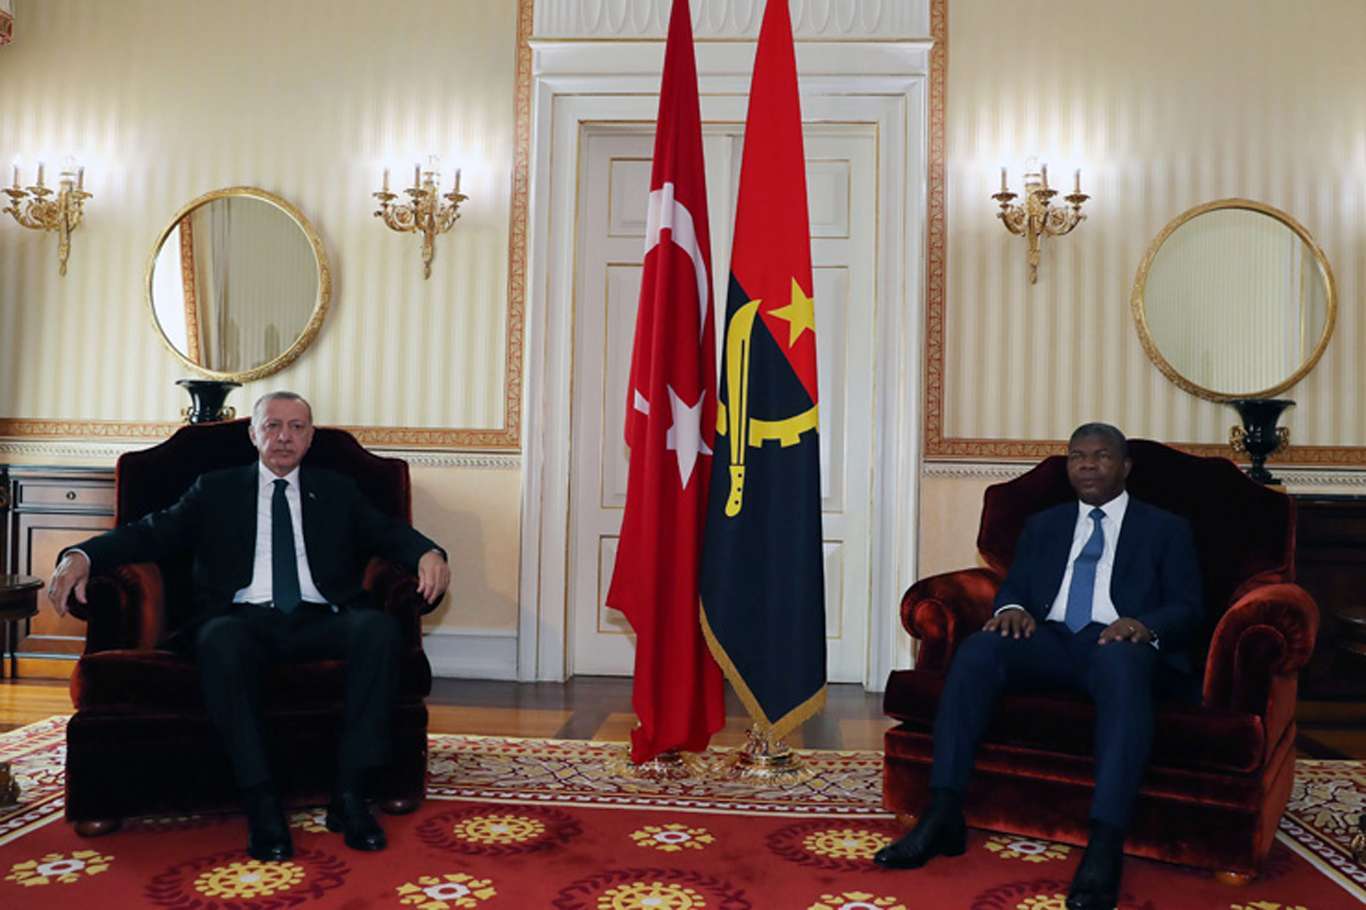 Erdoğan: Turkey, Angola have significant cooperation opportunities especially in energy